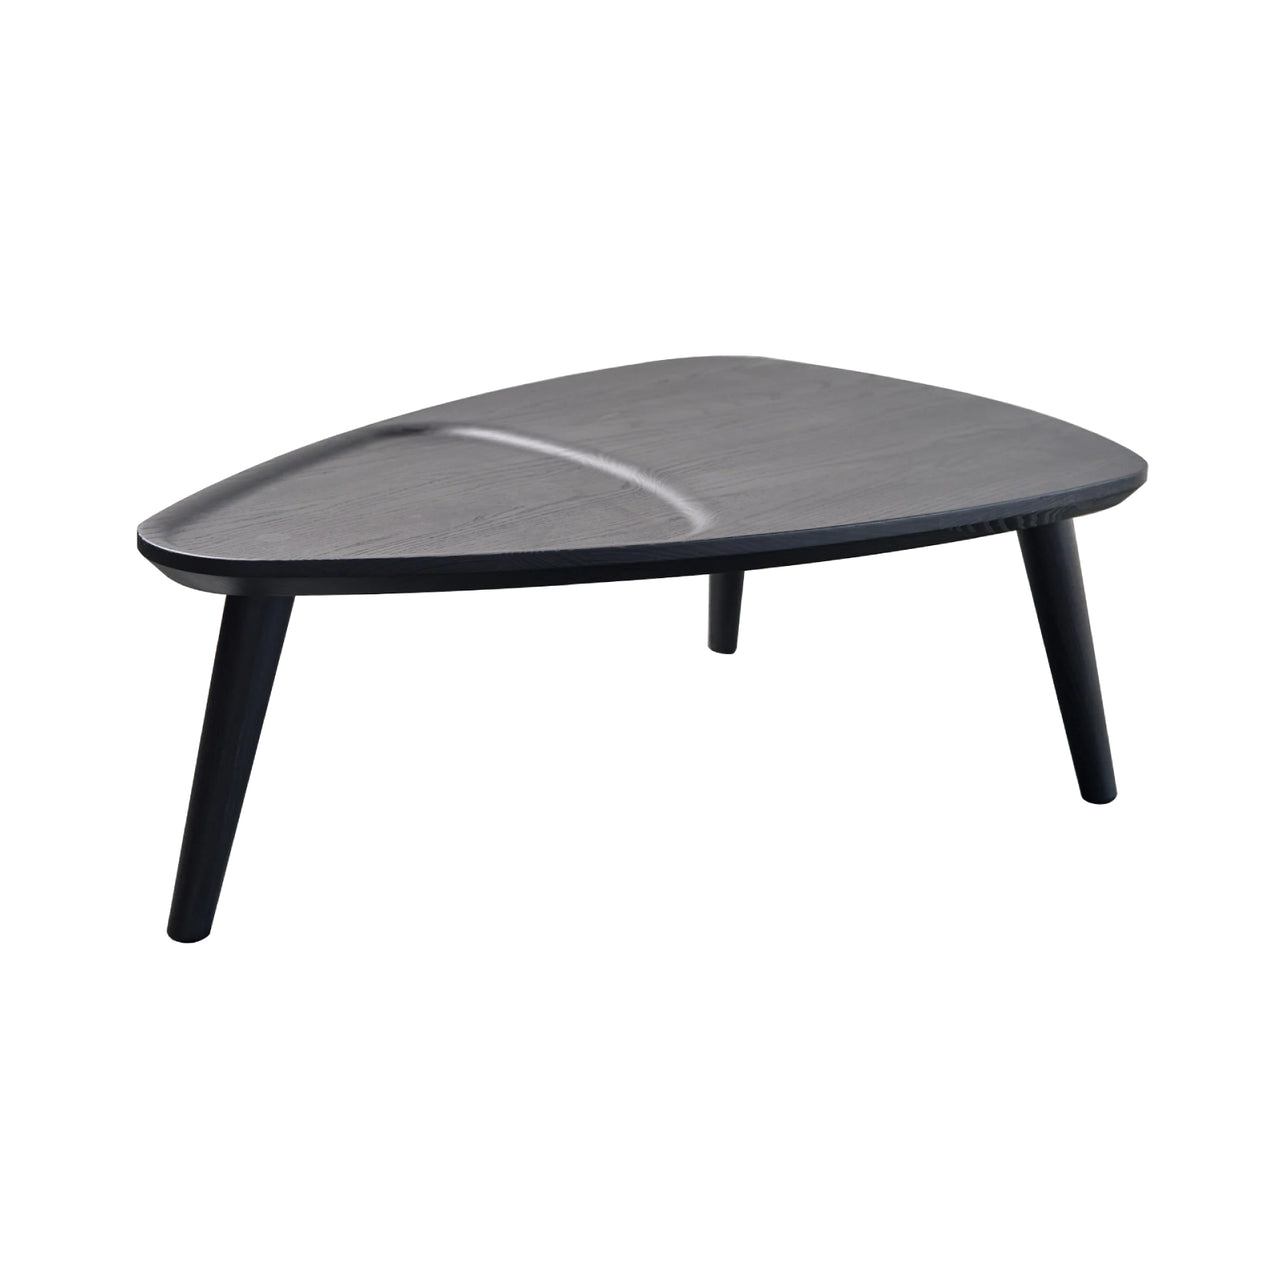 Oxbend Coffee Table: Charcoal Ash